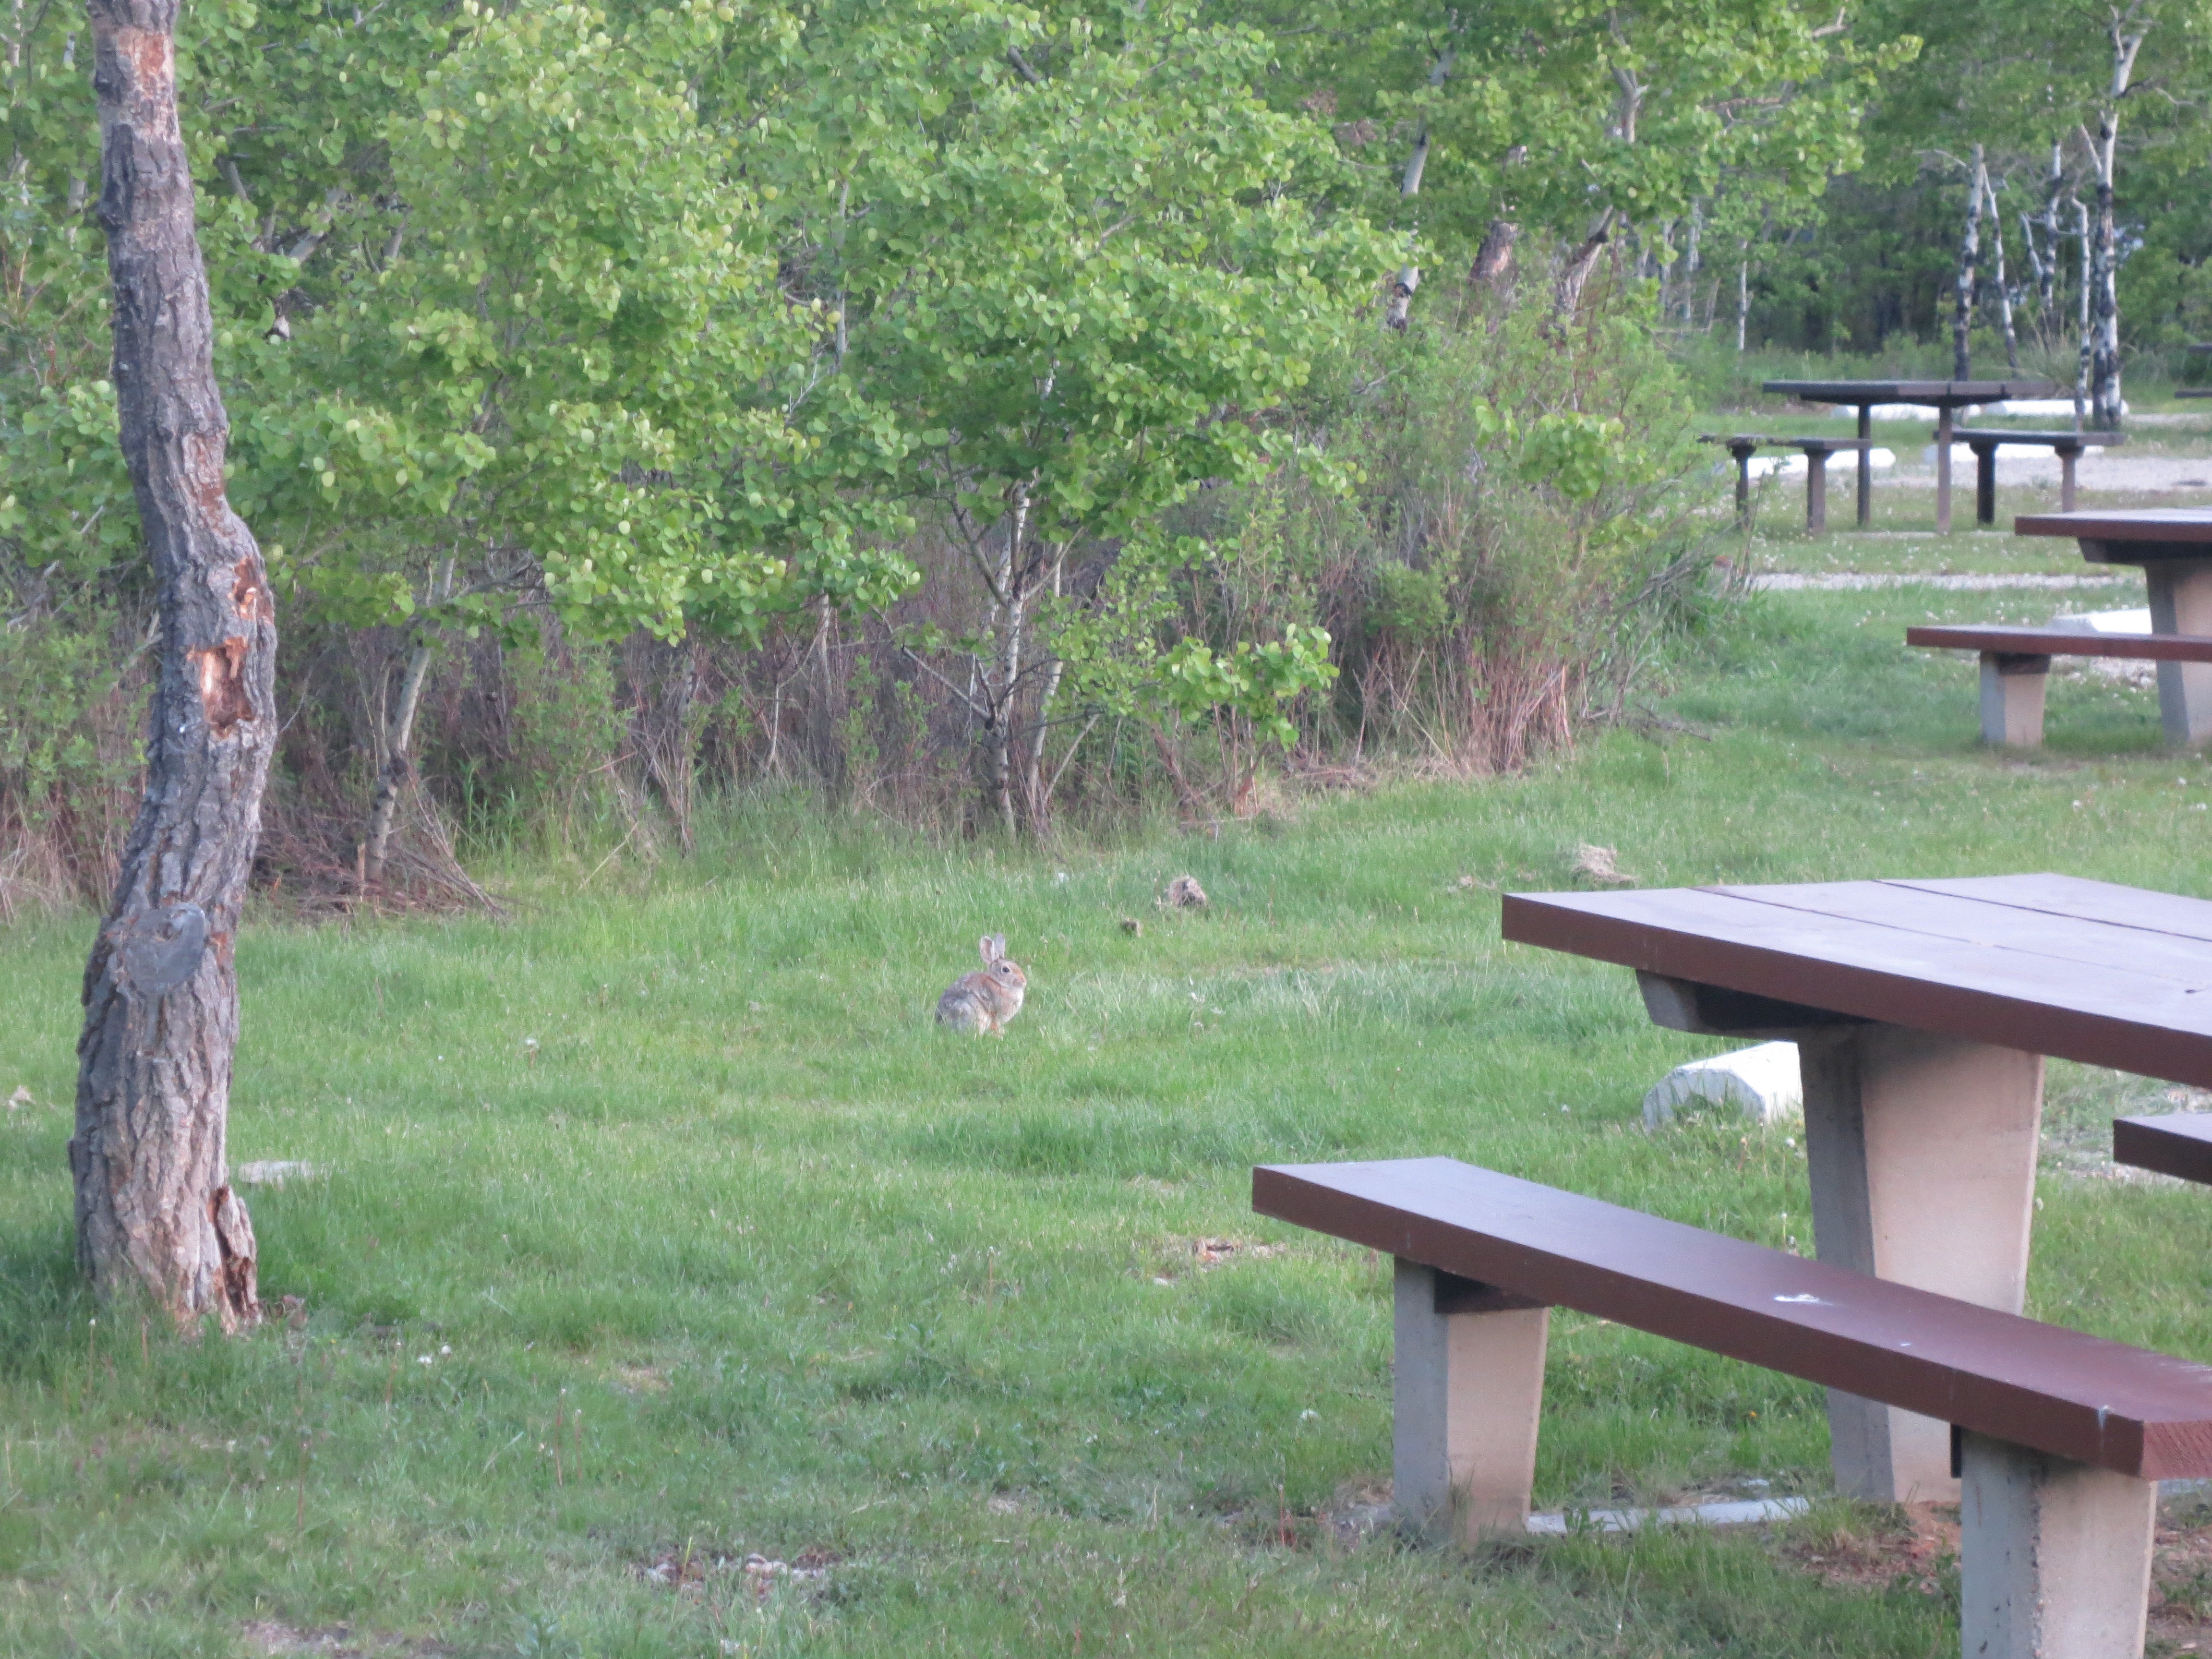 bunnies and picnic tables!